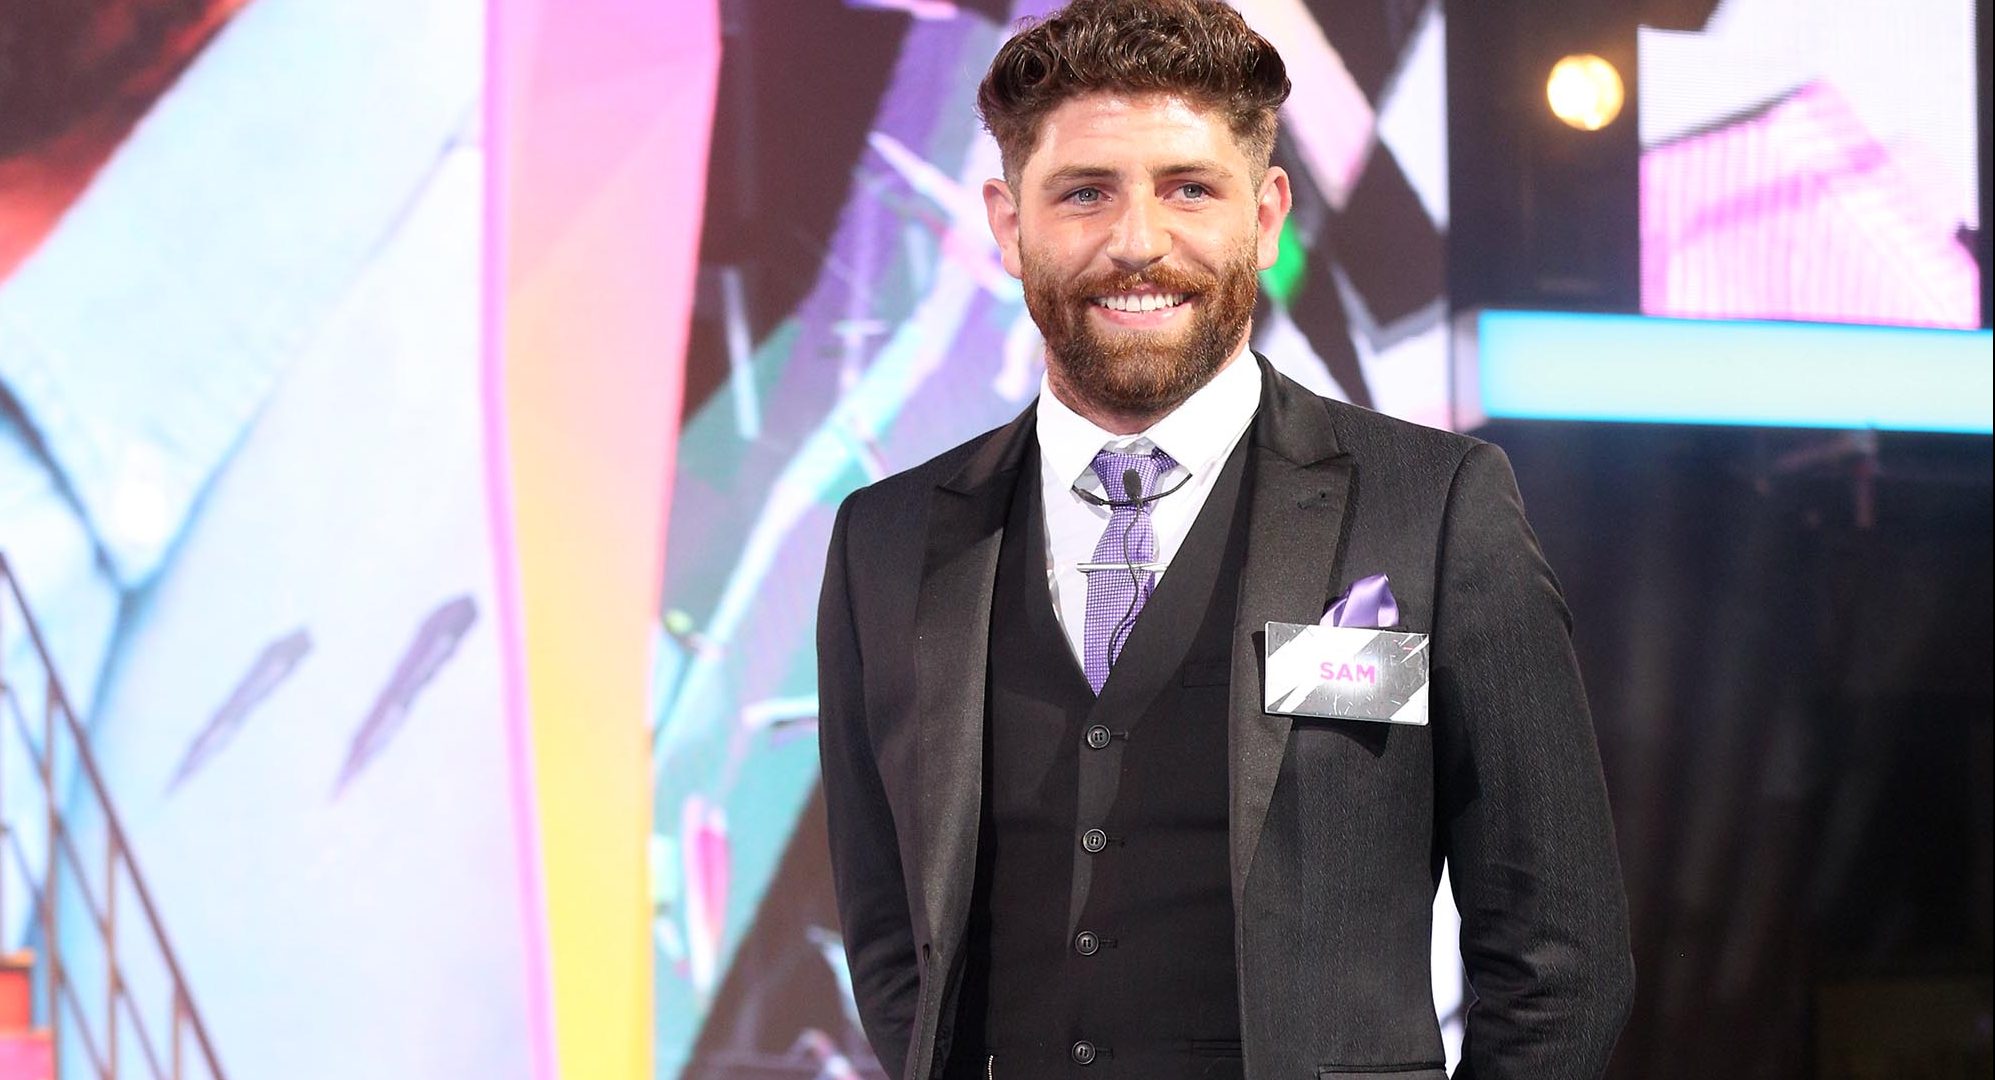 Big Brother’s Sam Giffen criticised against for “stereotypical” gay comment